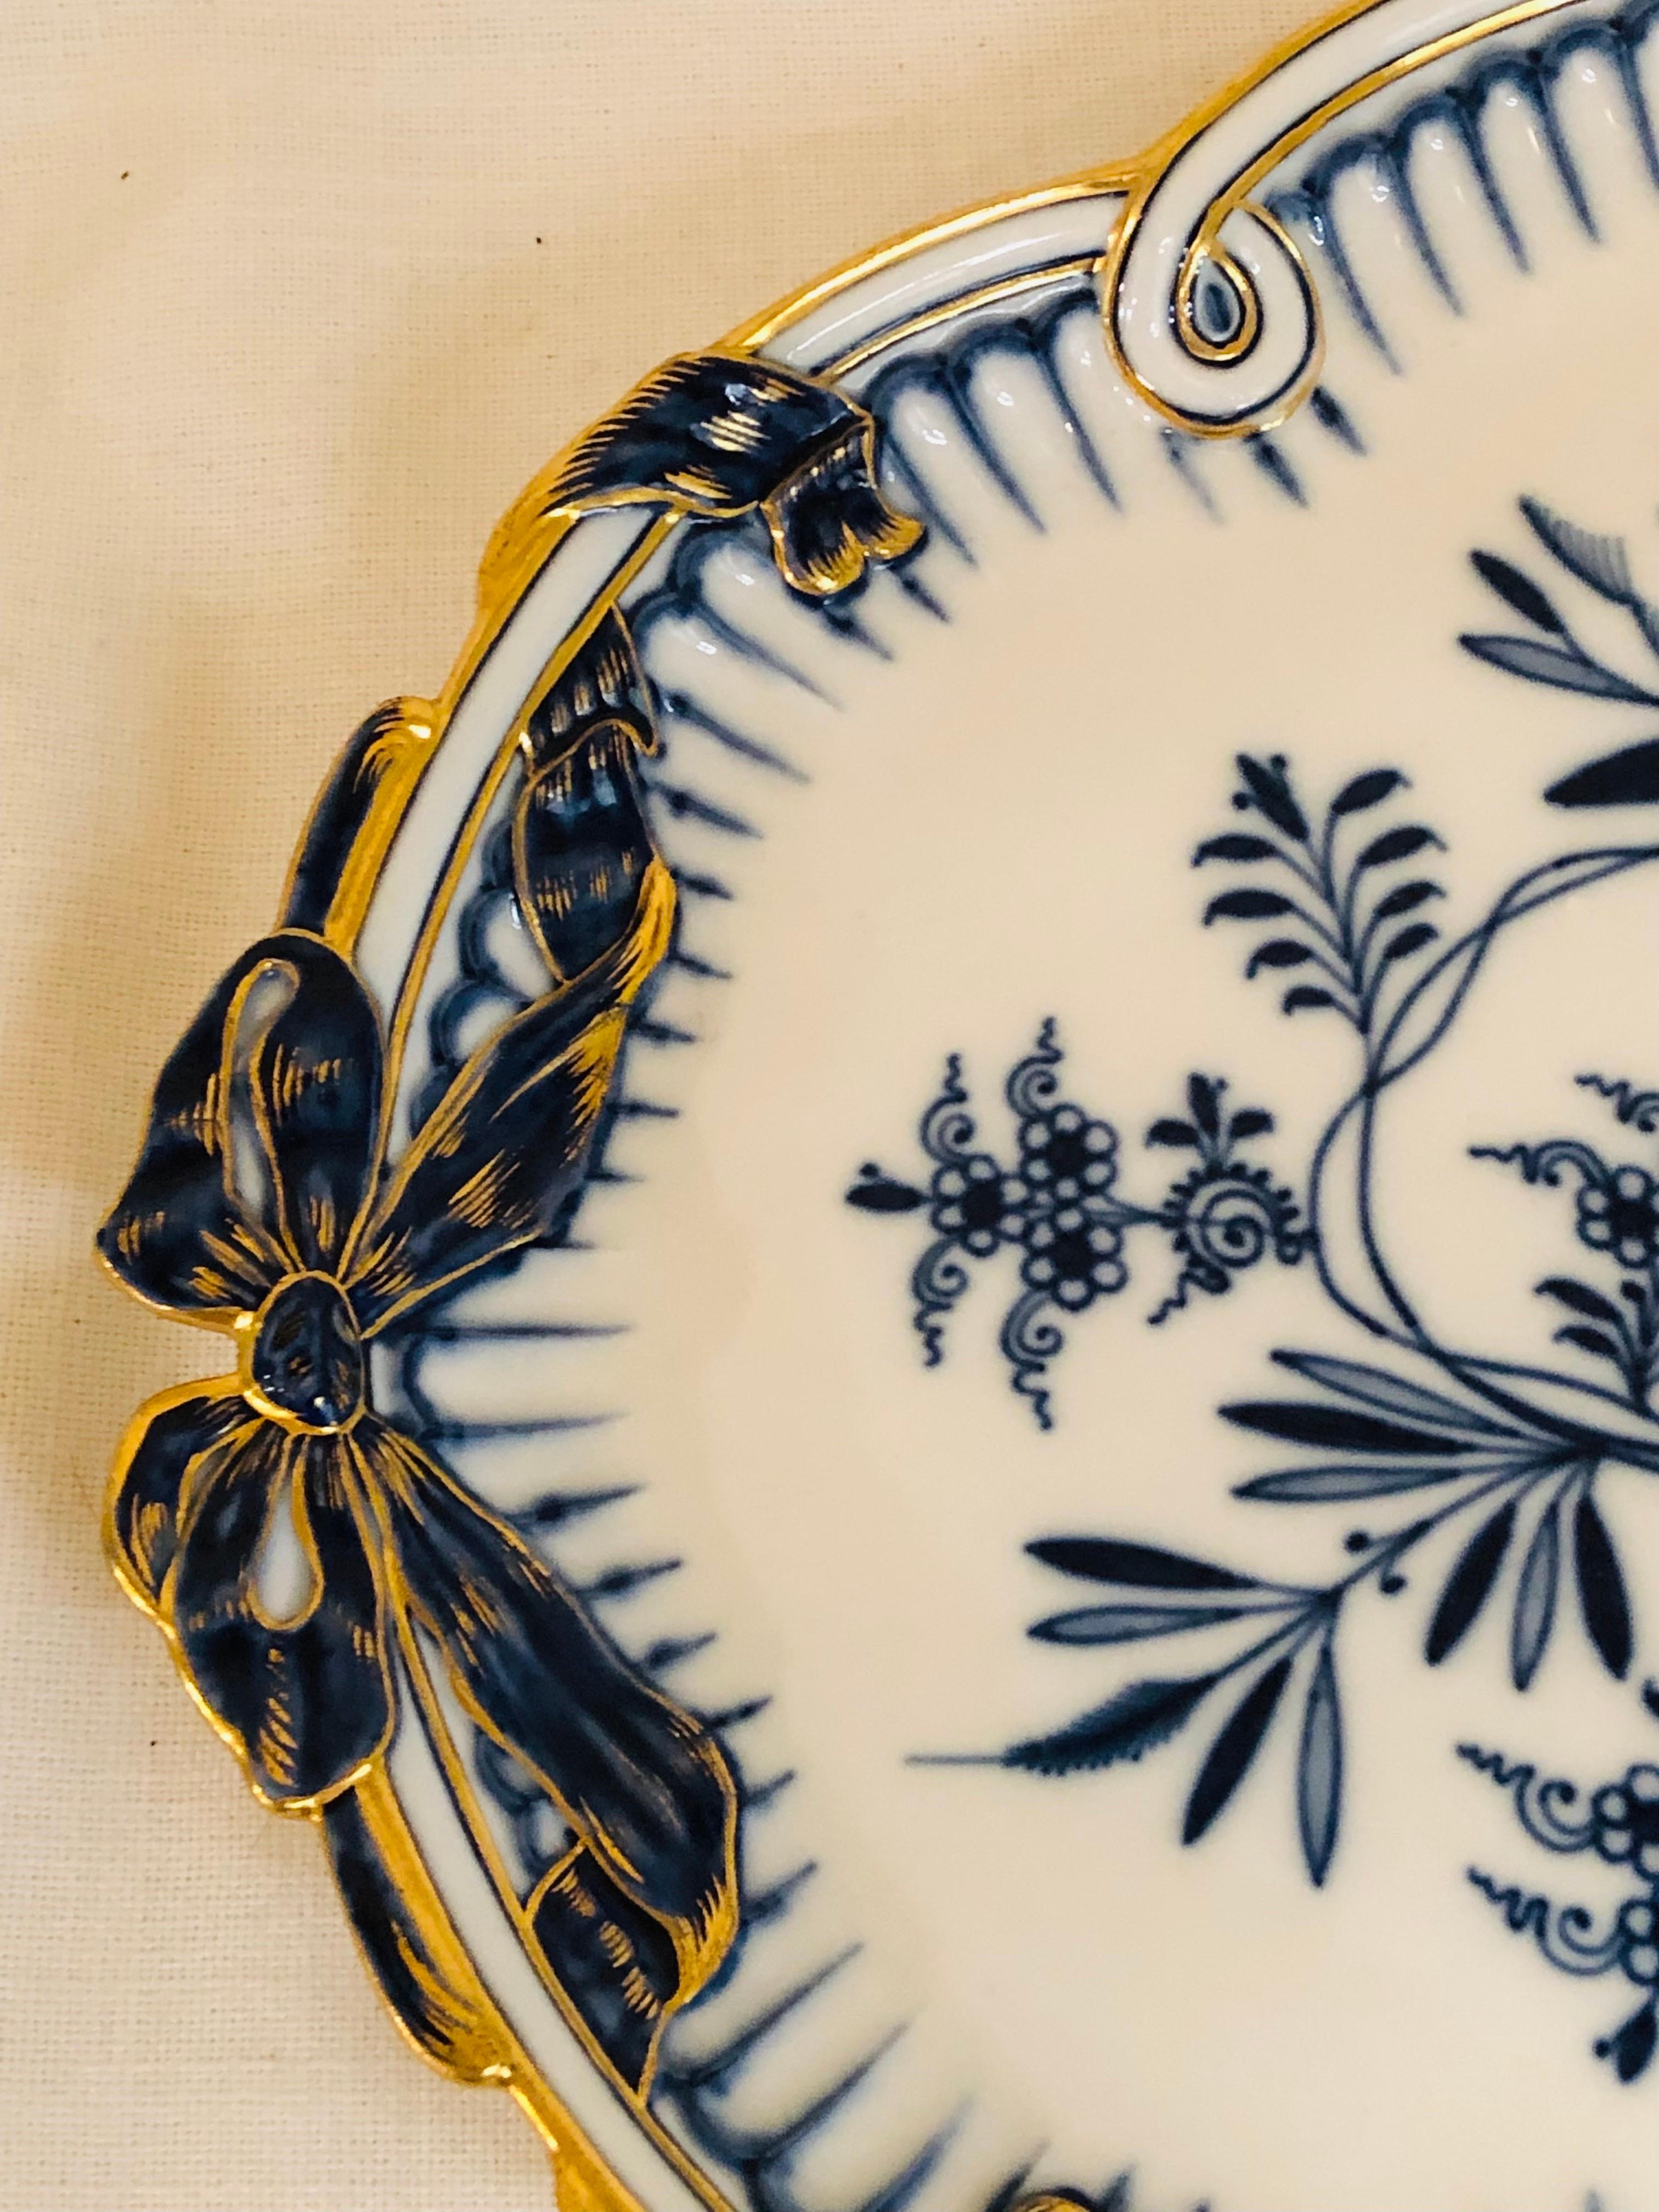 German Meissen Blue Onion Antique Serving Tray with Gold Border and Bow Handles